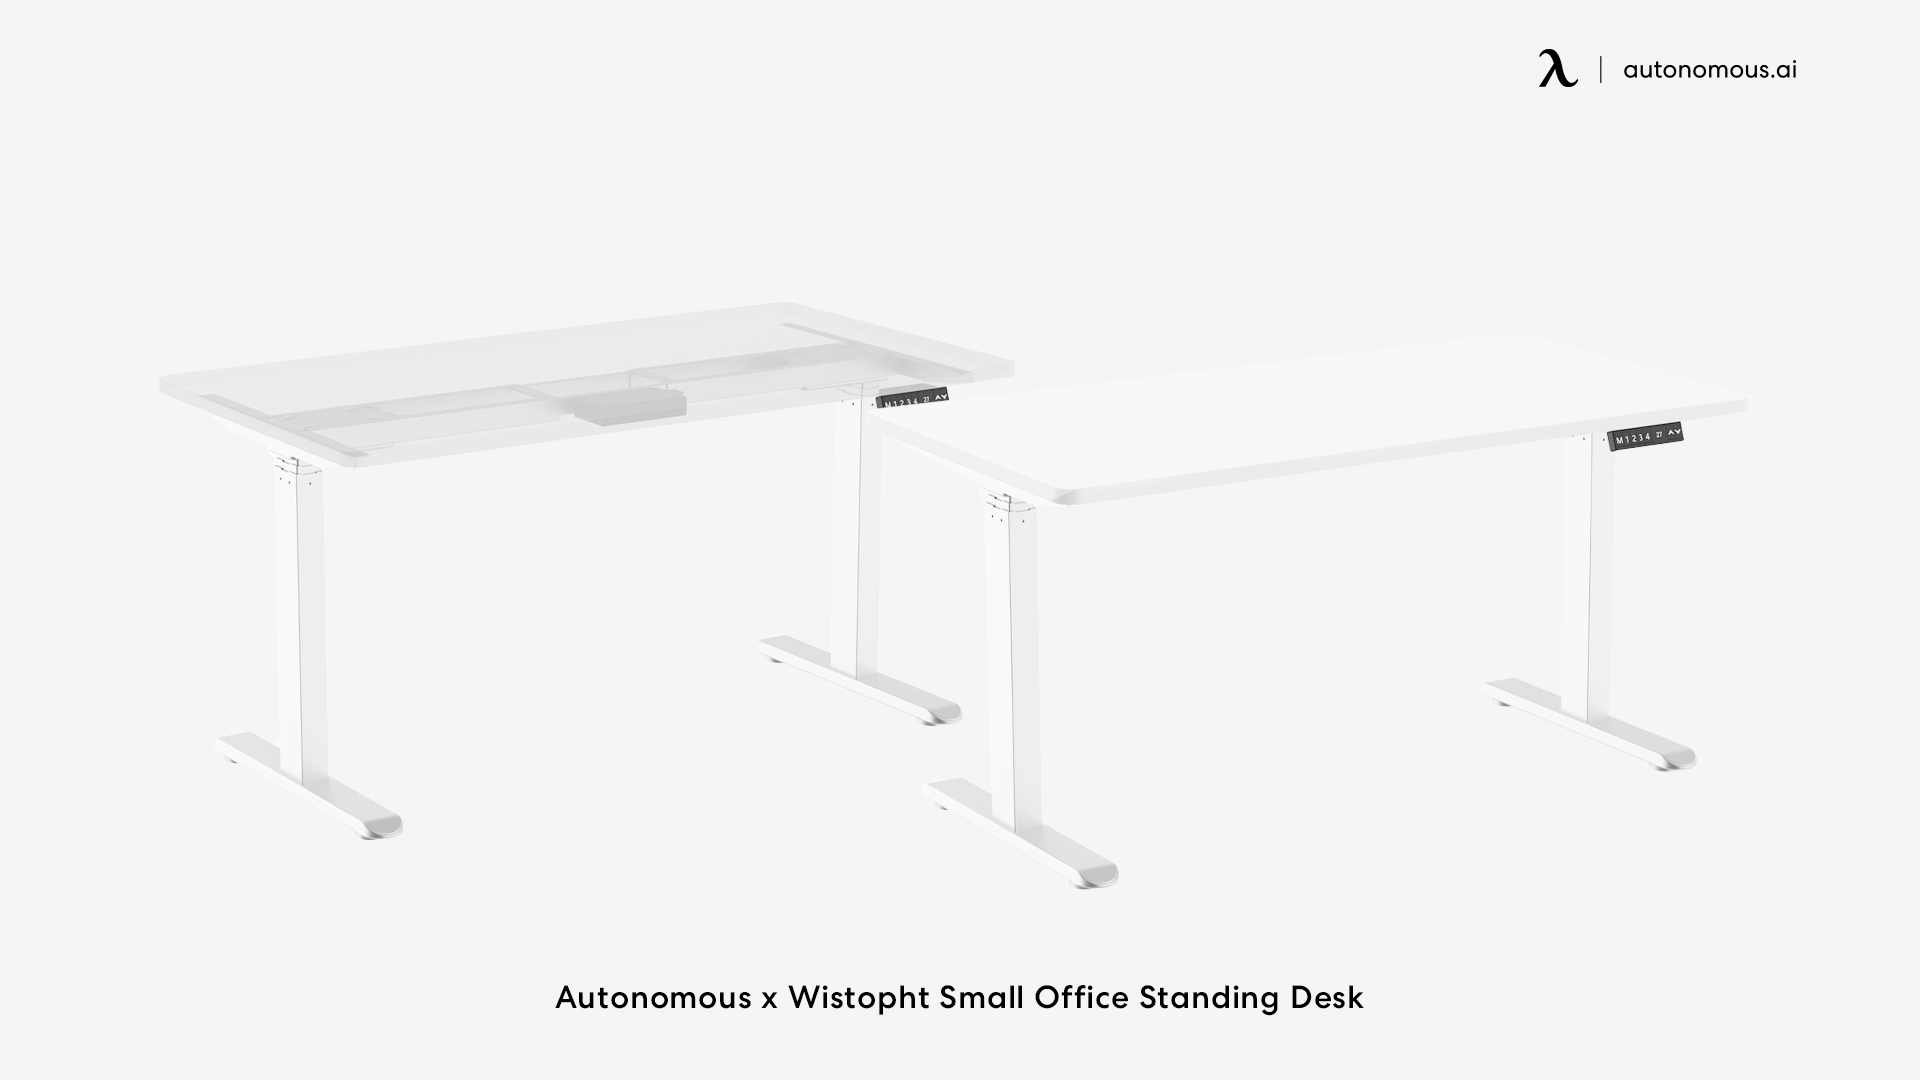 Wistopht Compact adjustable standing desk with storage